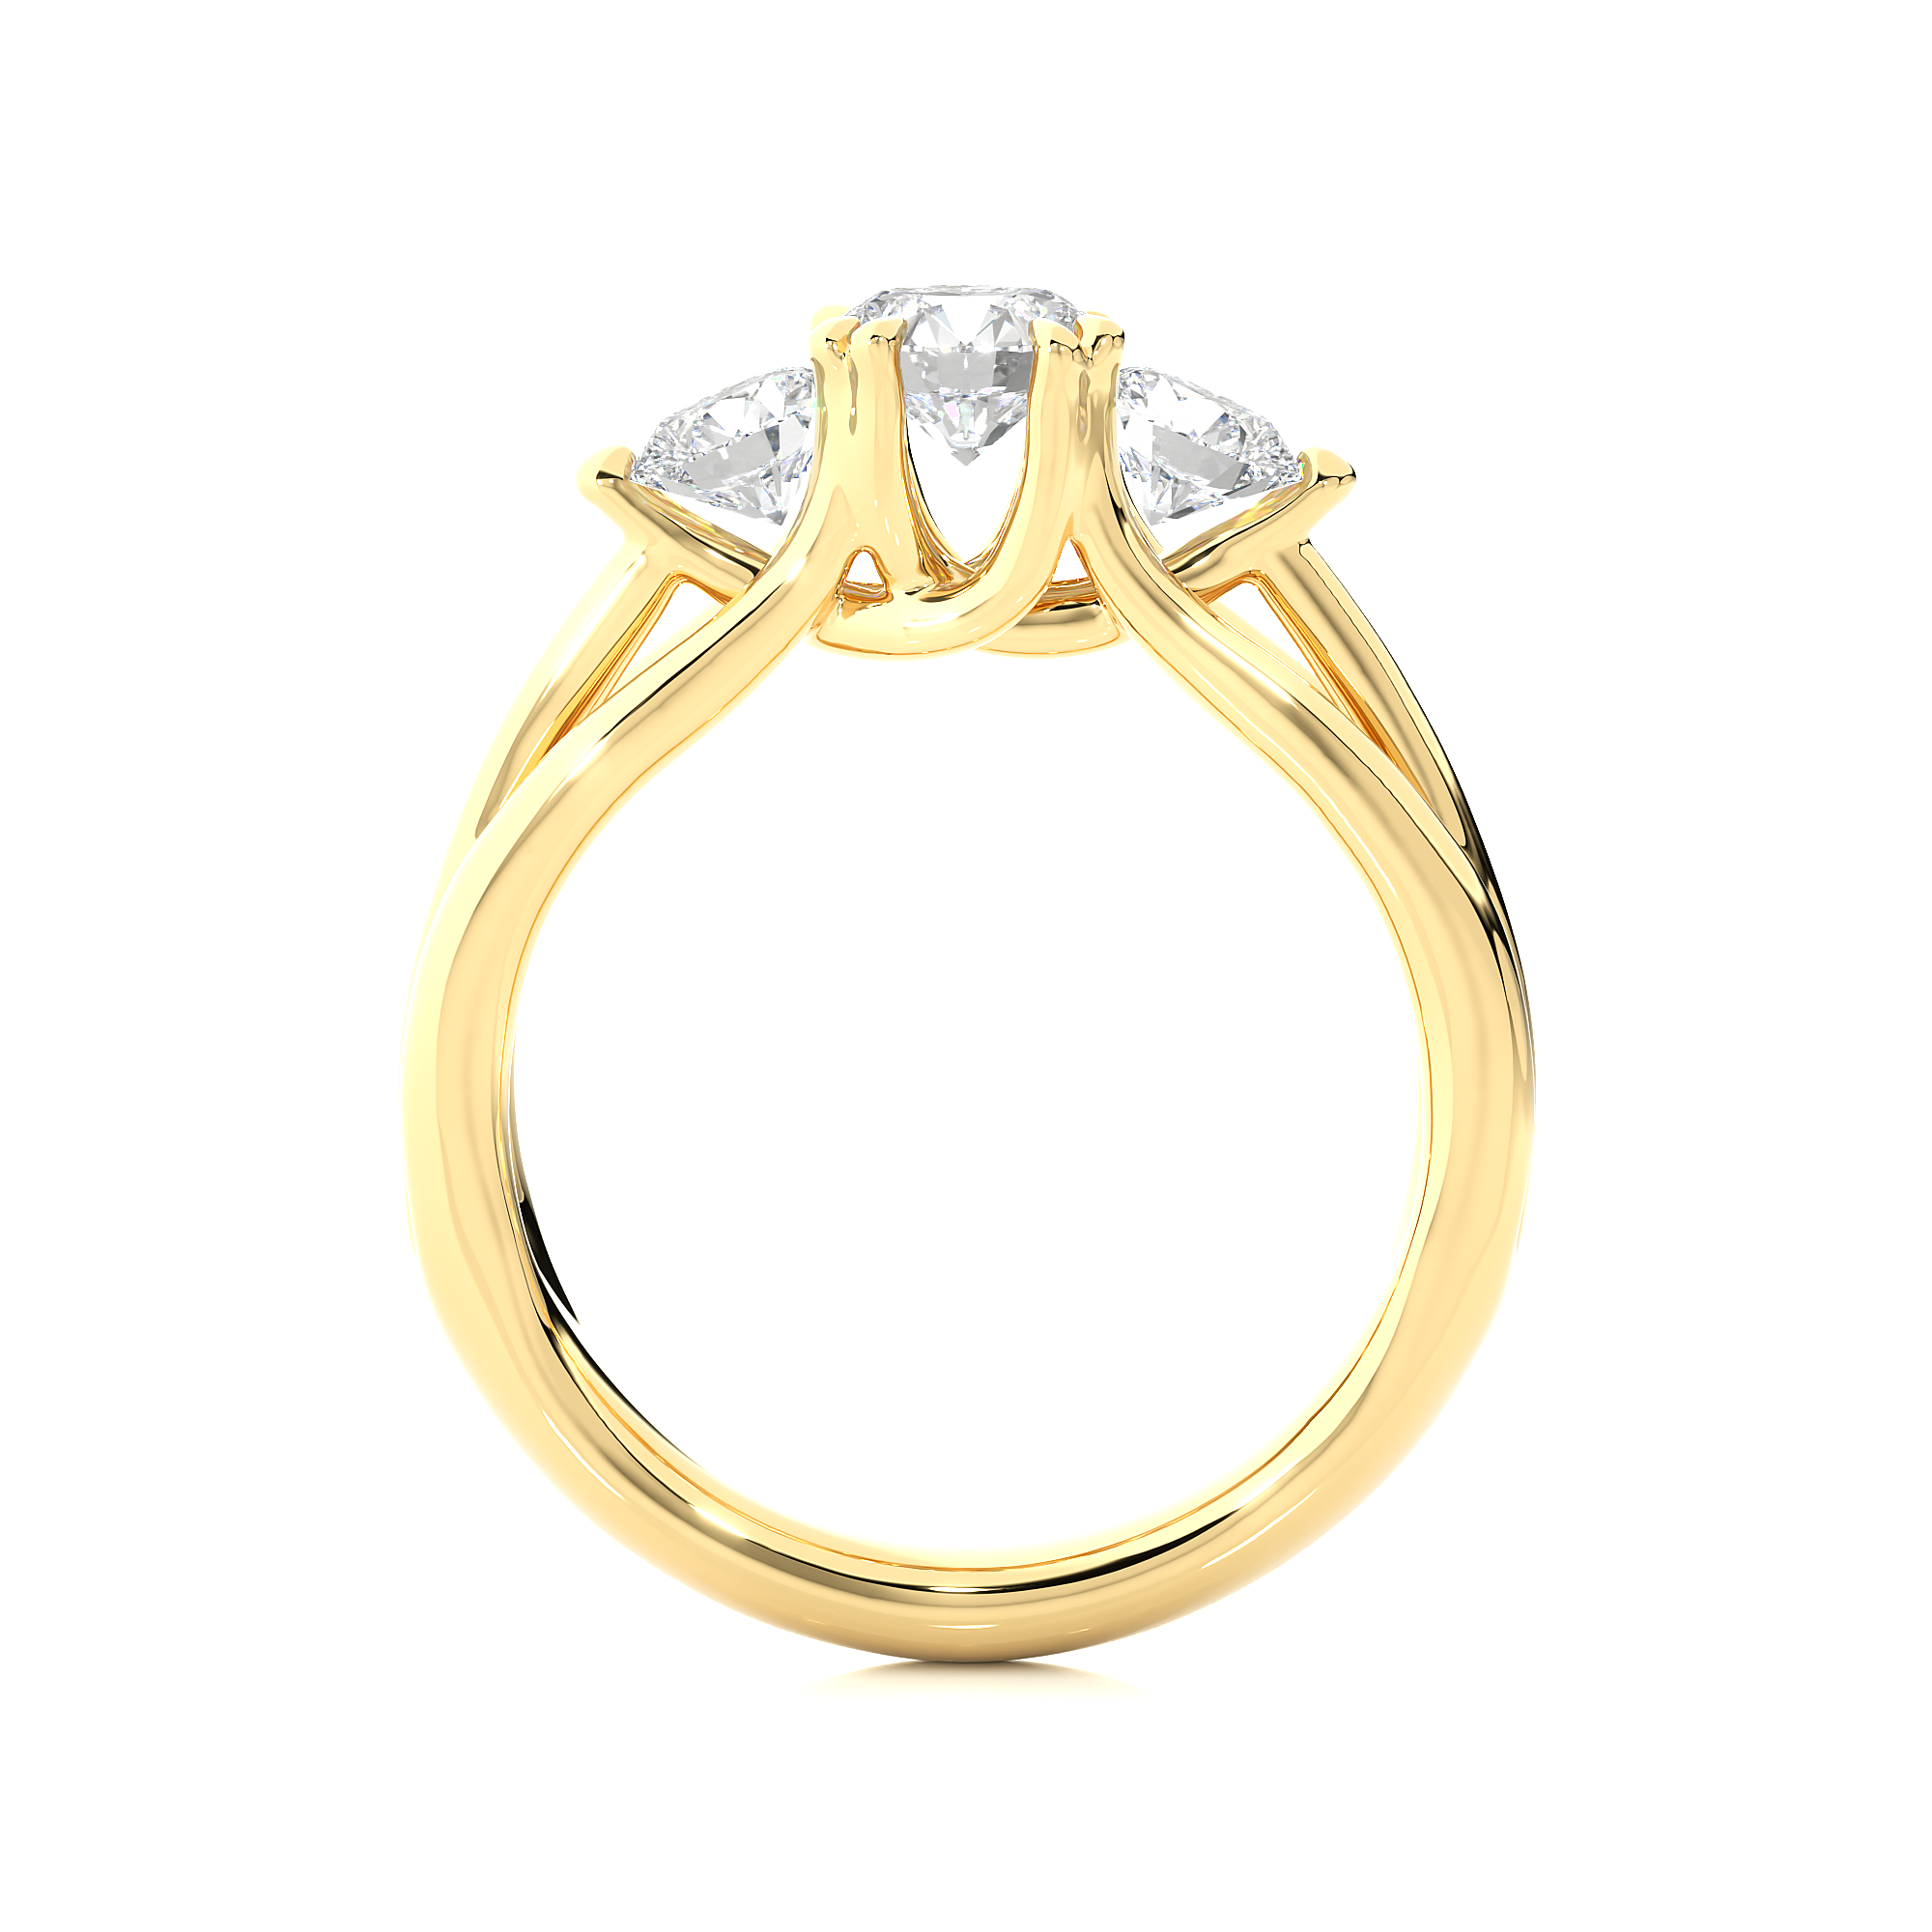 Dearie Darling Solitaire Lab Grown Diamond Ring